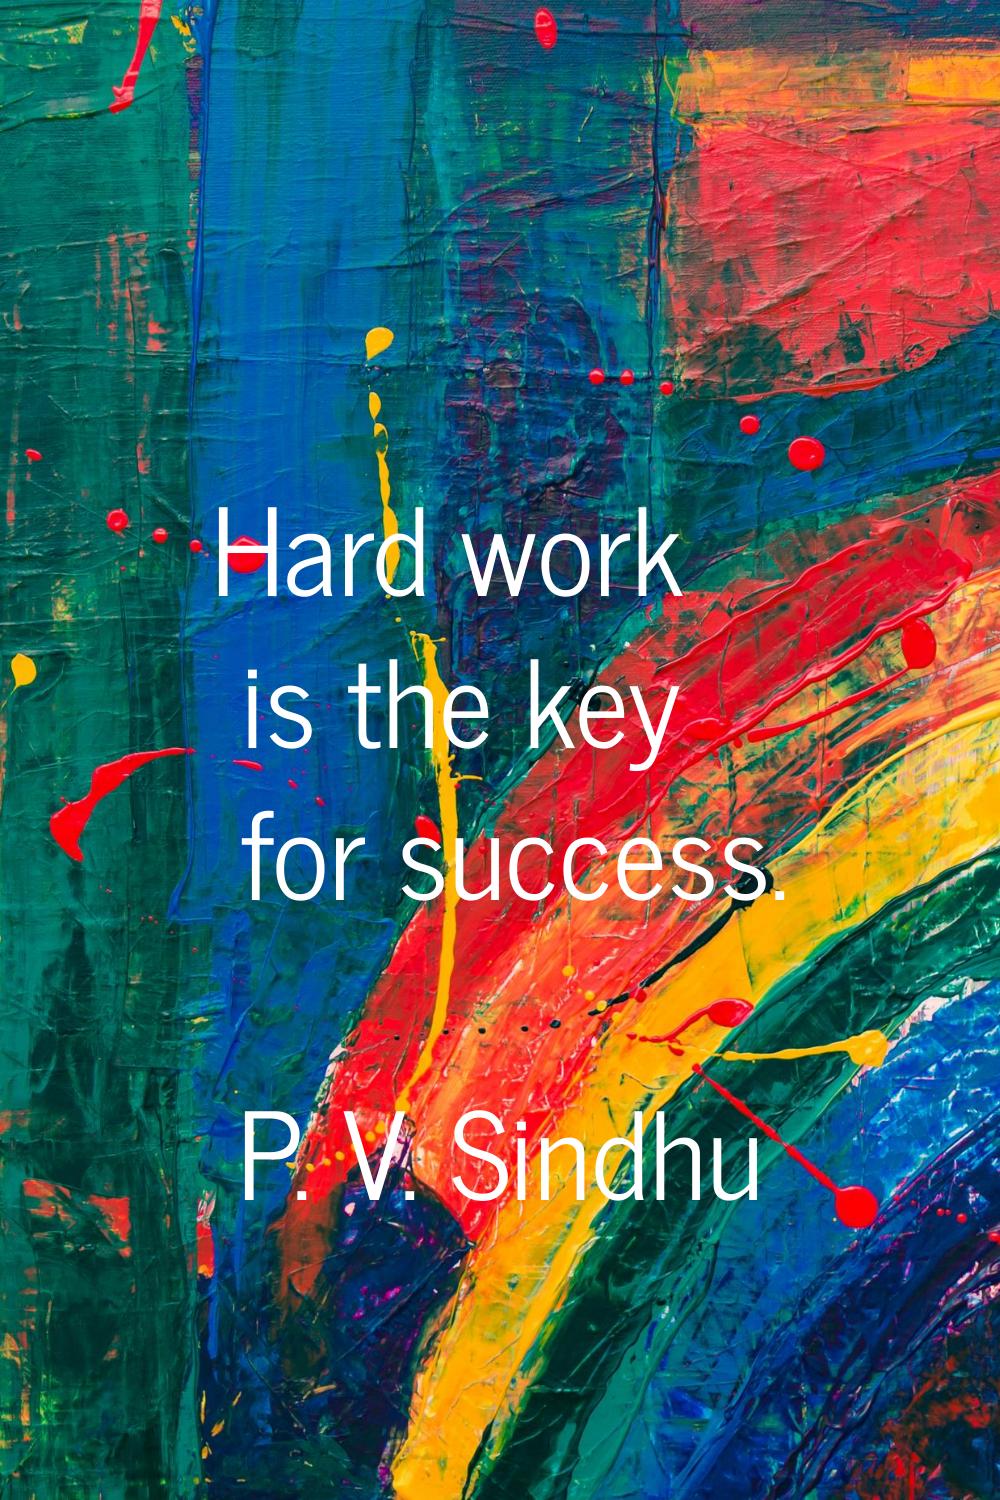 Hard work is the key for success.